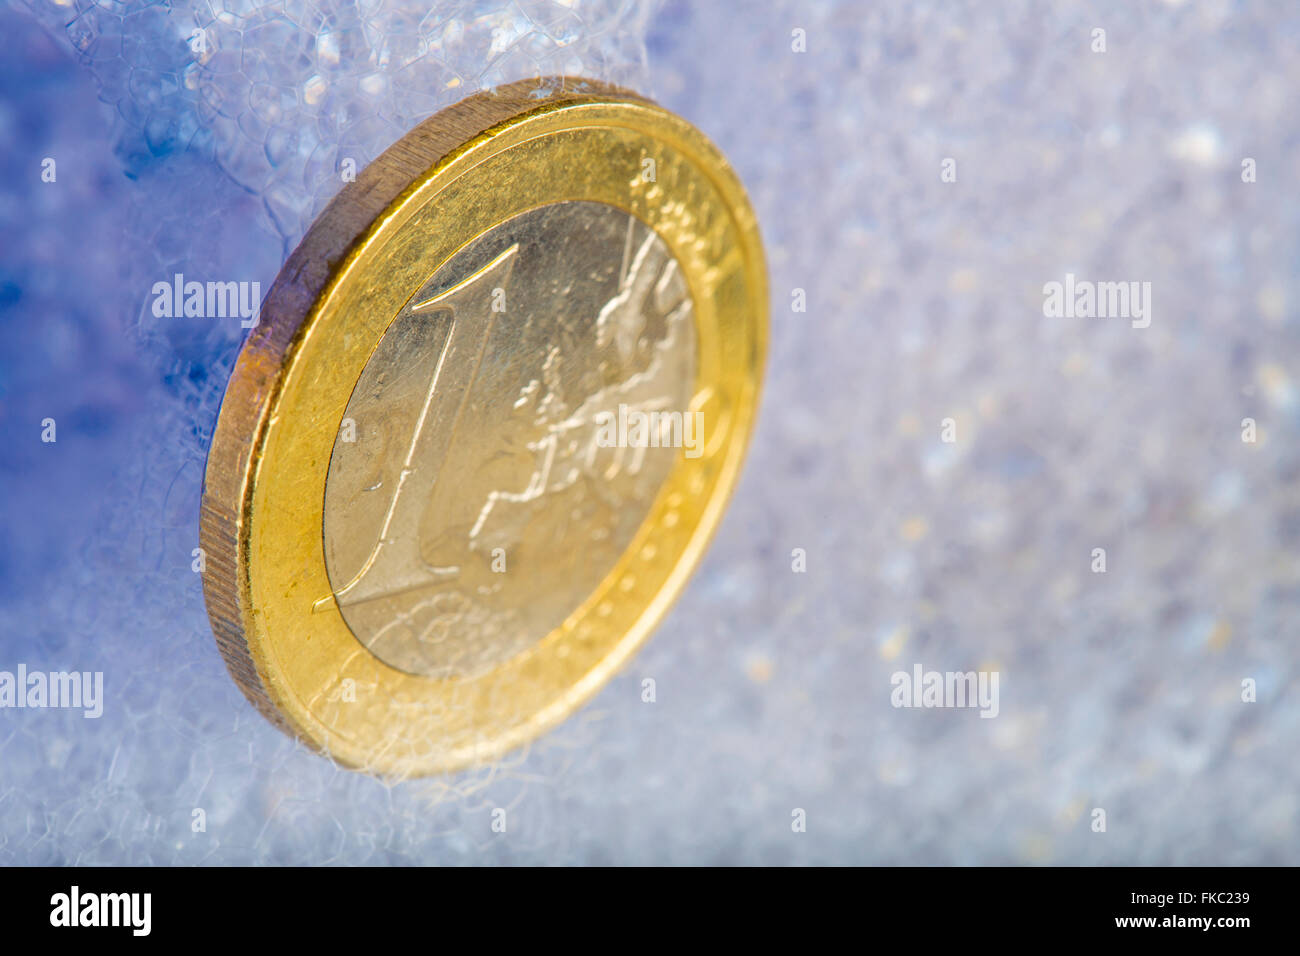 economic recovery of the euro currency and refloating the economy Stock Photo